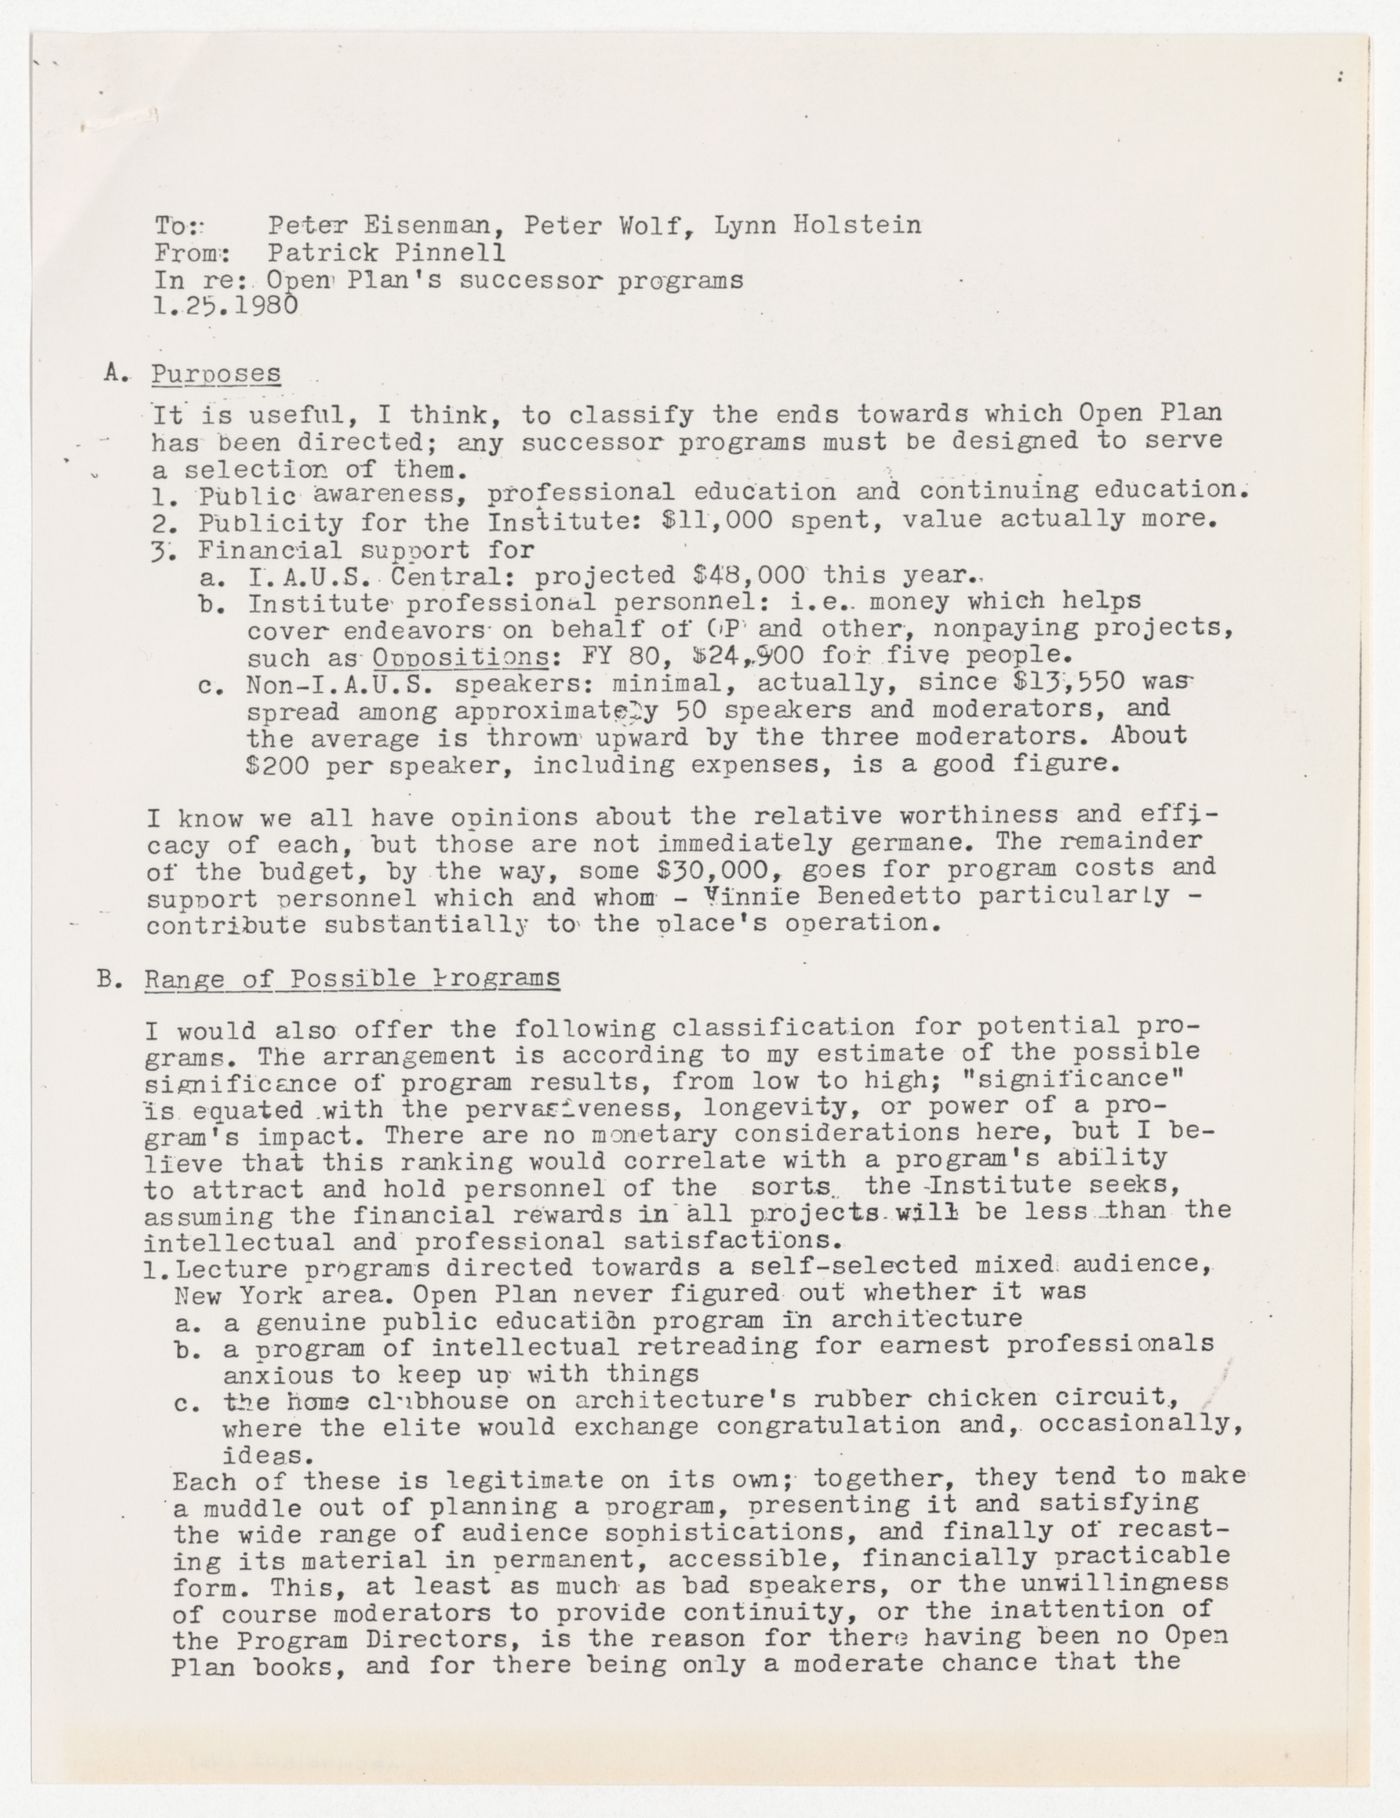 Typed notes from Patrick Pinnell to Peter D. Eisenman, Peter Wolf, and Lynn Holstein about Open Plan's successor programs